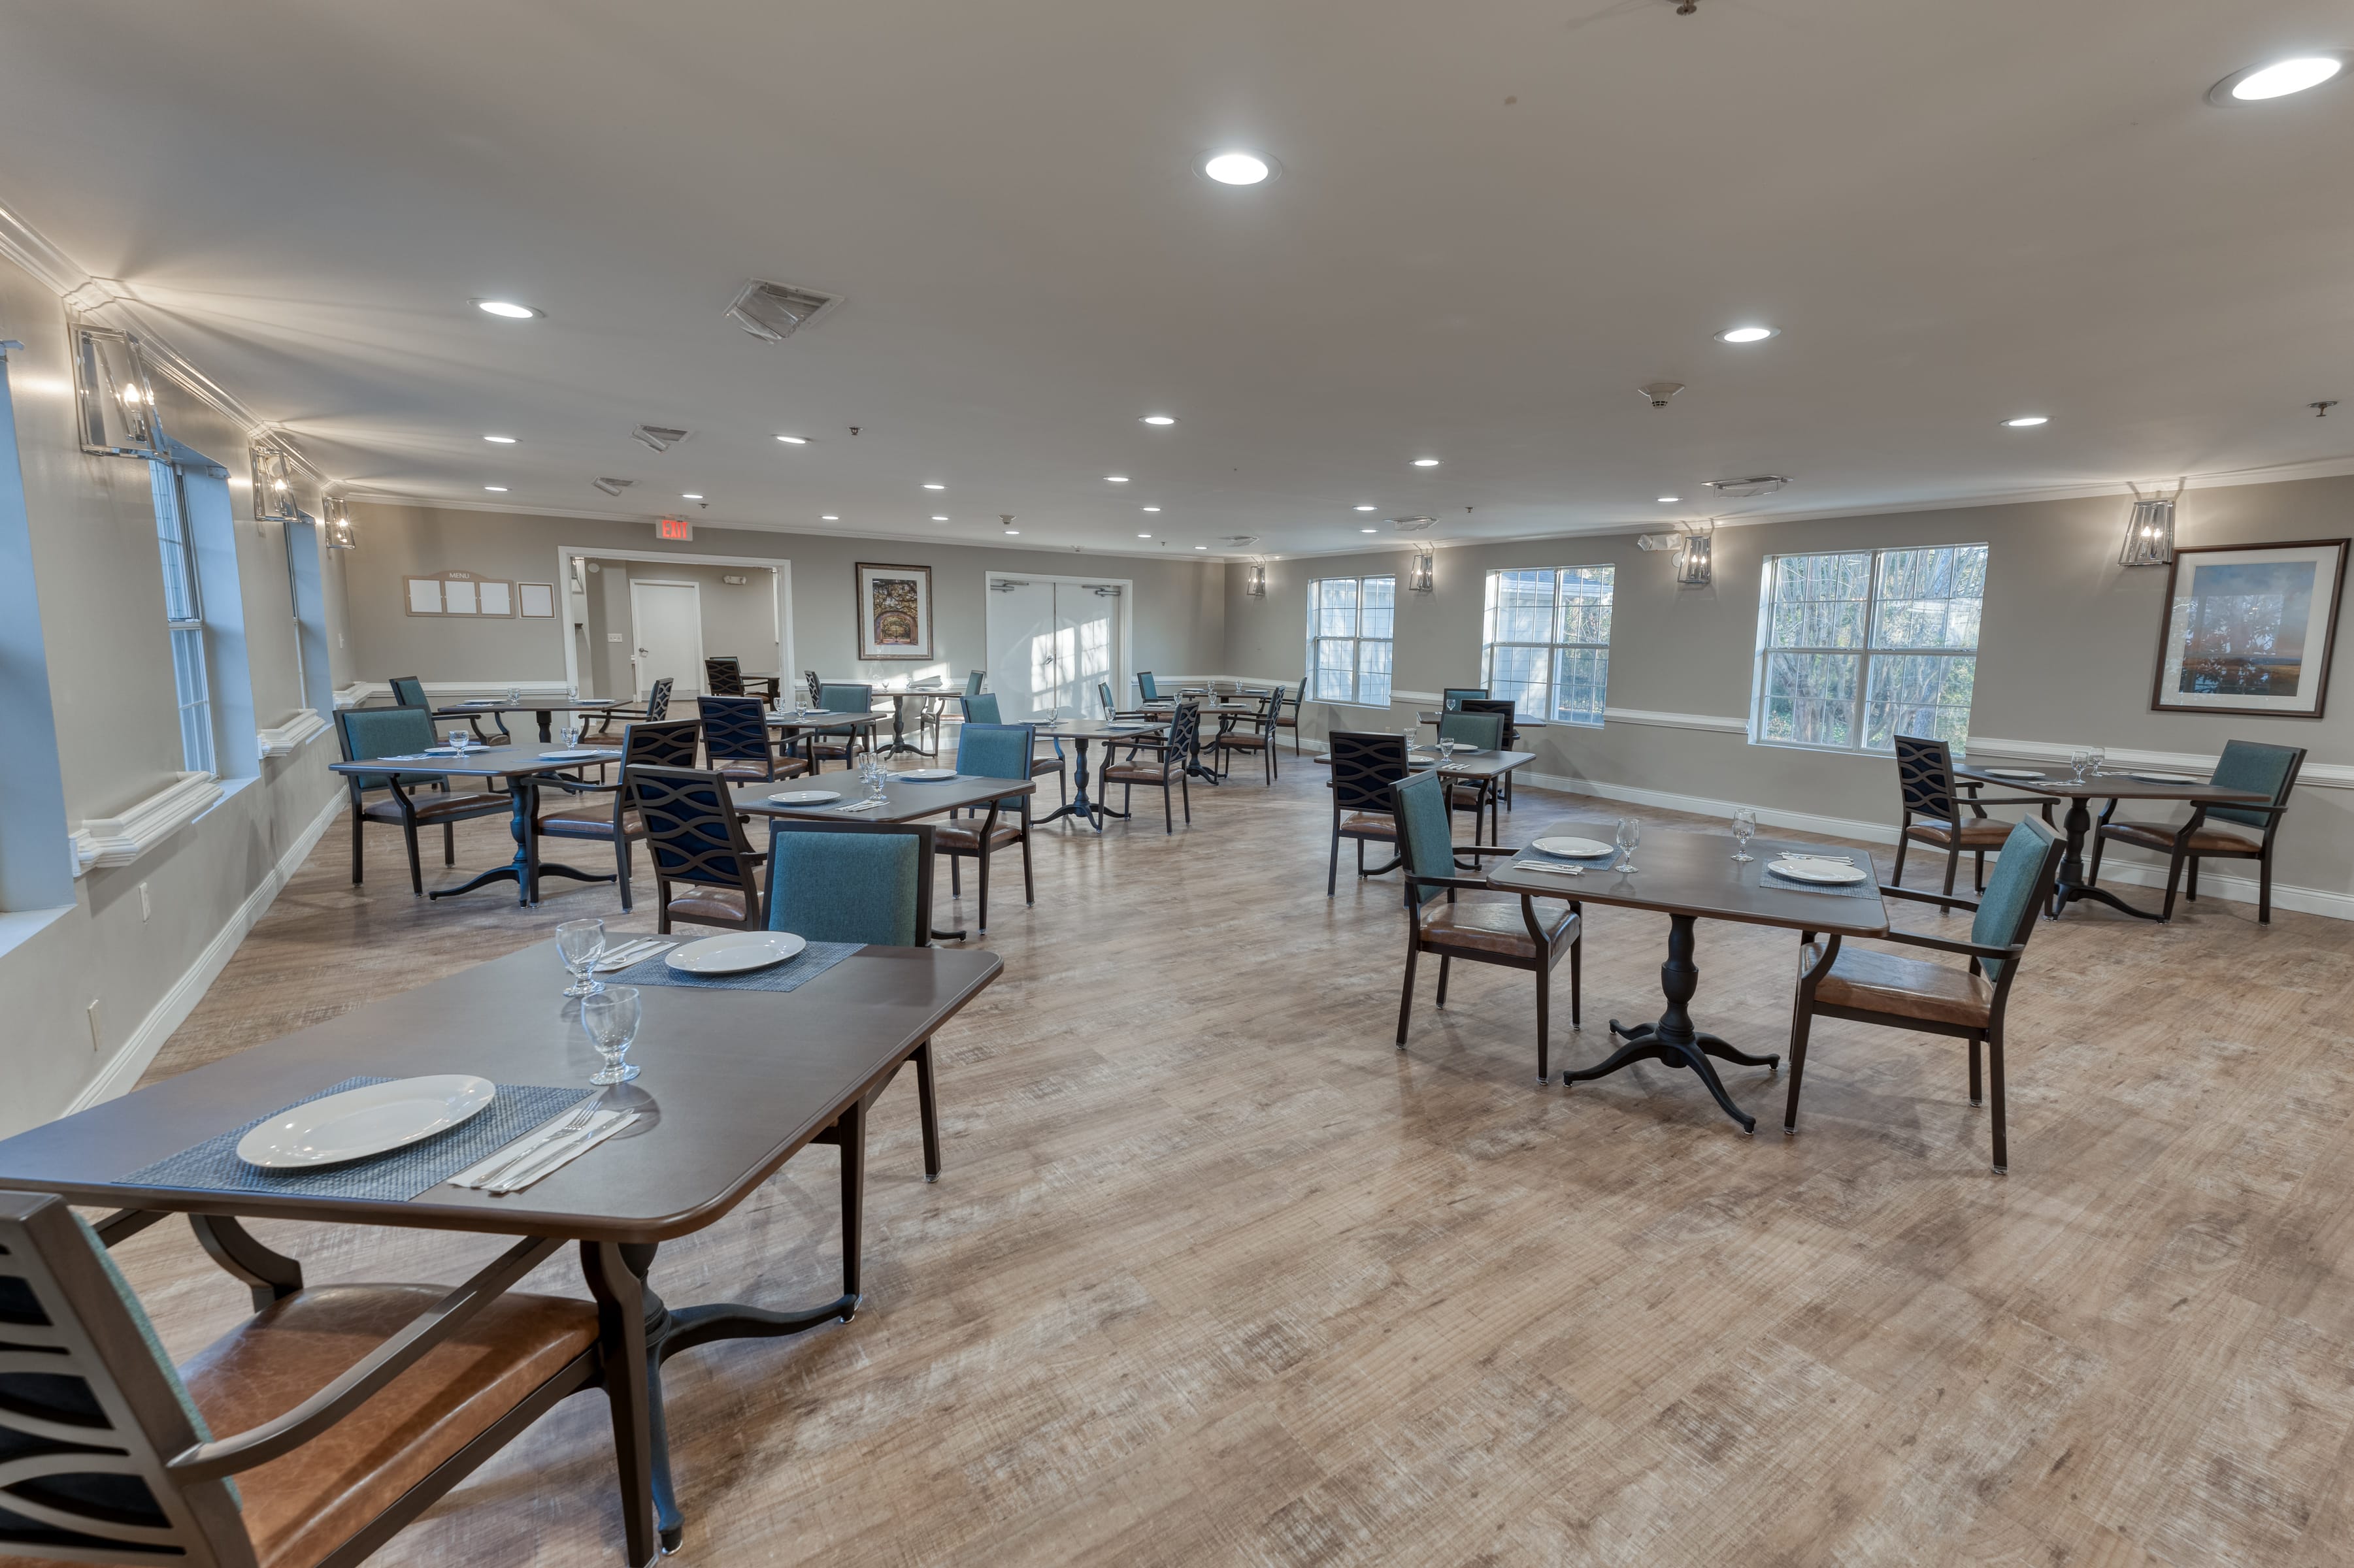 Open dining and social areas